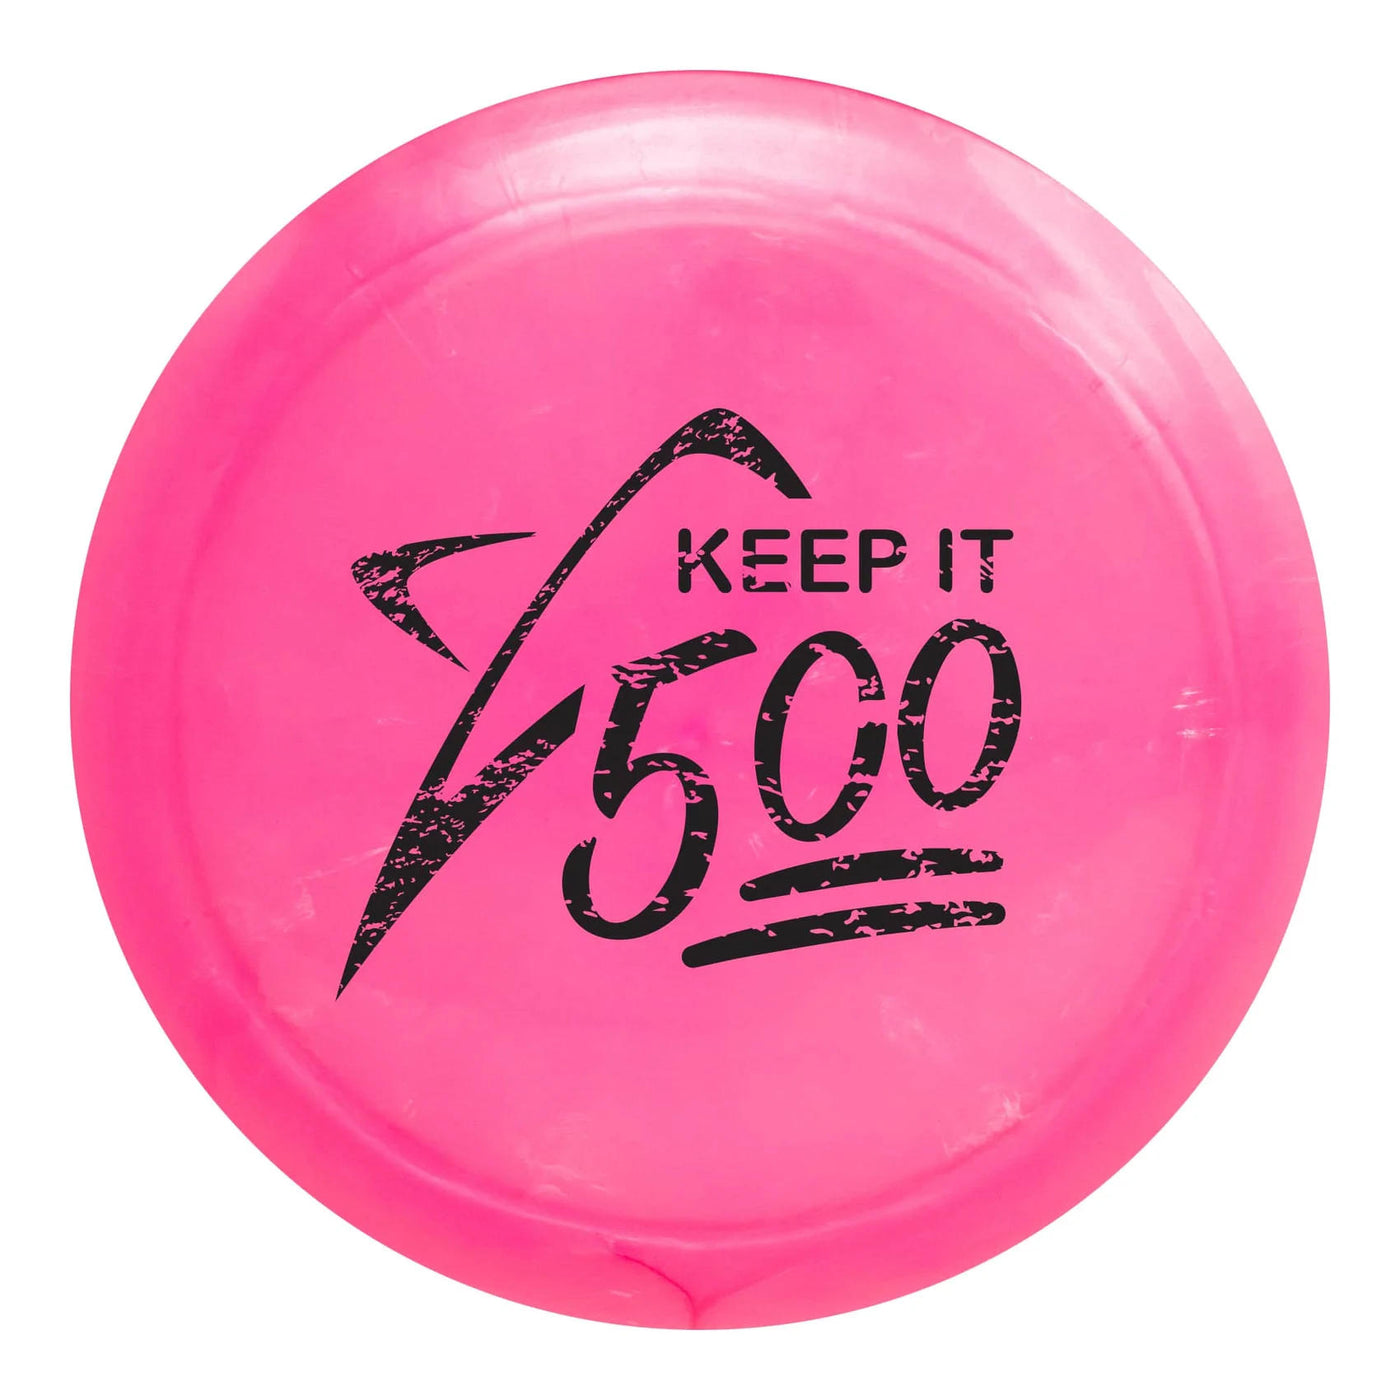 Prodigy 500 X5 Distance Driver with Keep It 500 Stamp - Speed 13